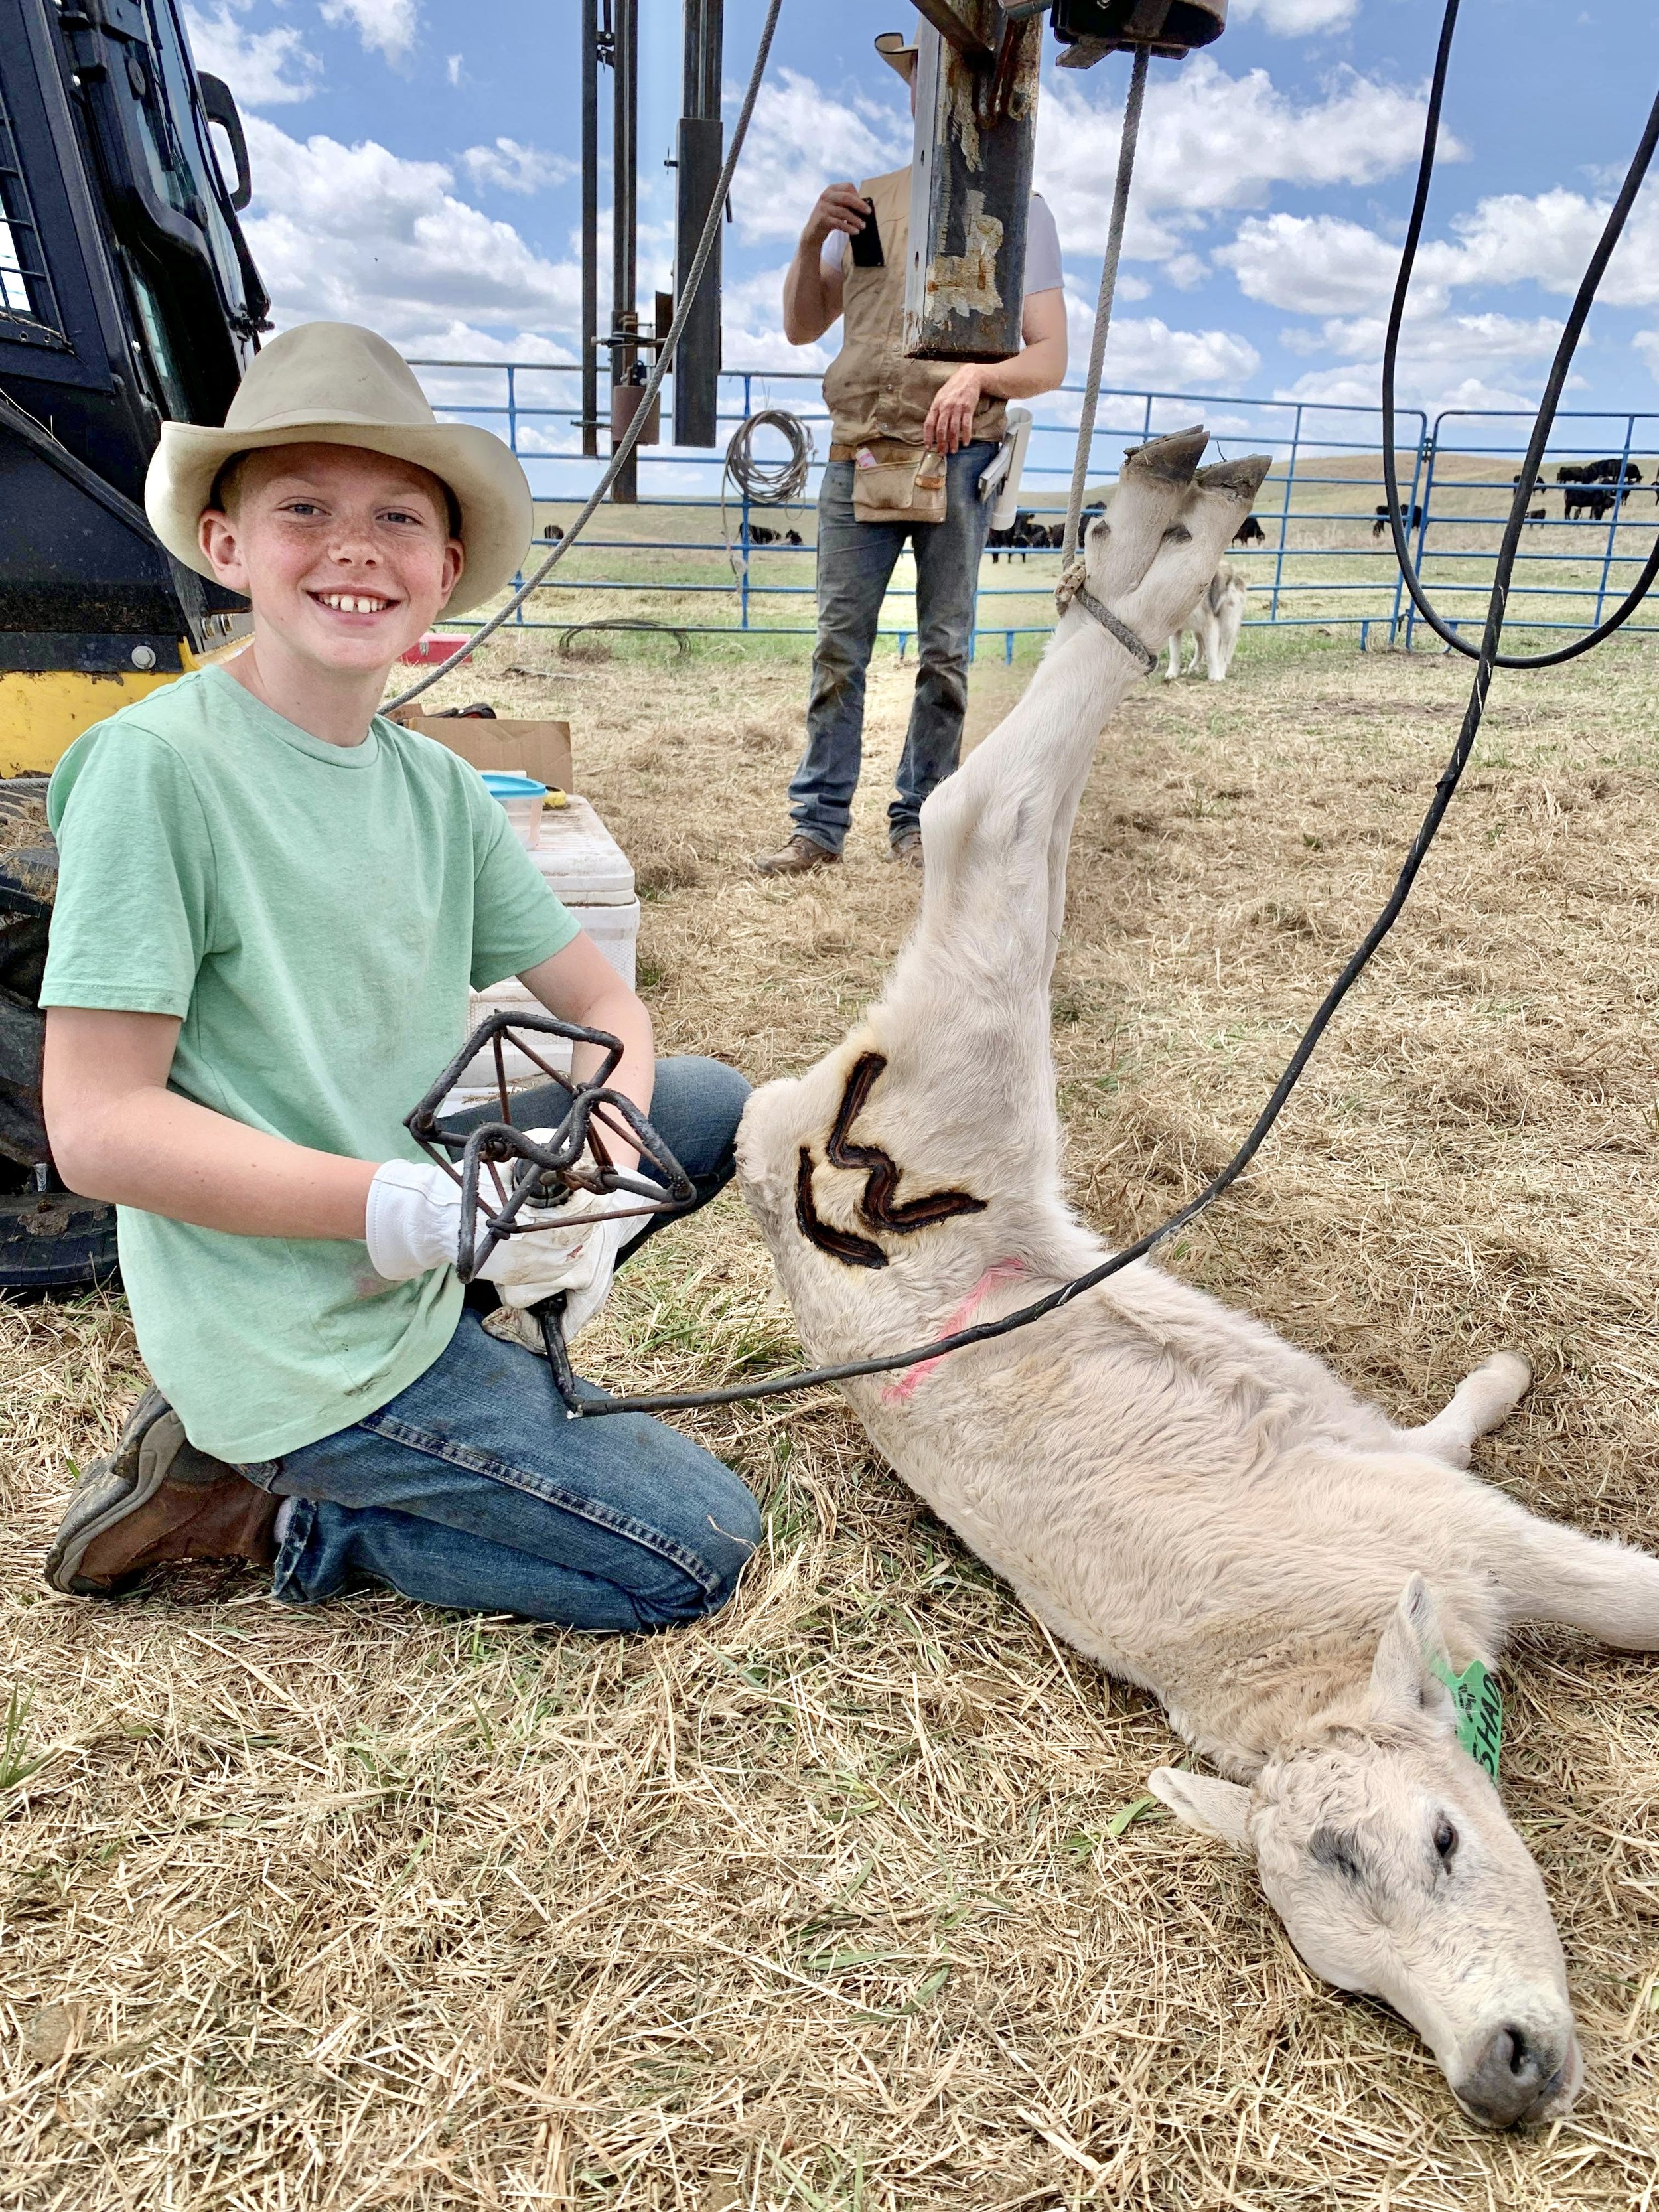  Holden was excused from homeschool early to help with the brandings. He was able to brand a JerseyX calf with his “Rafter M” brand. 